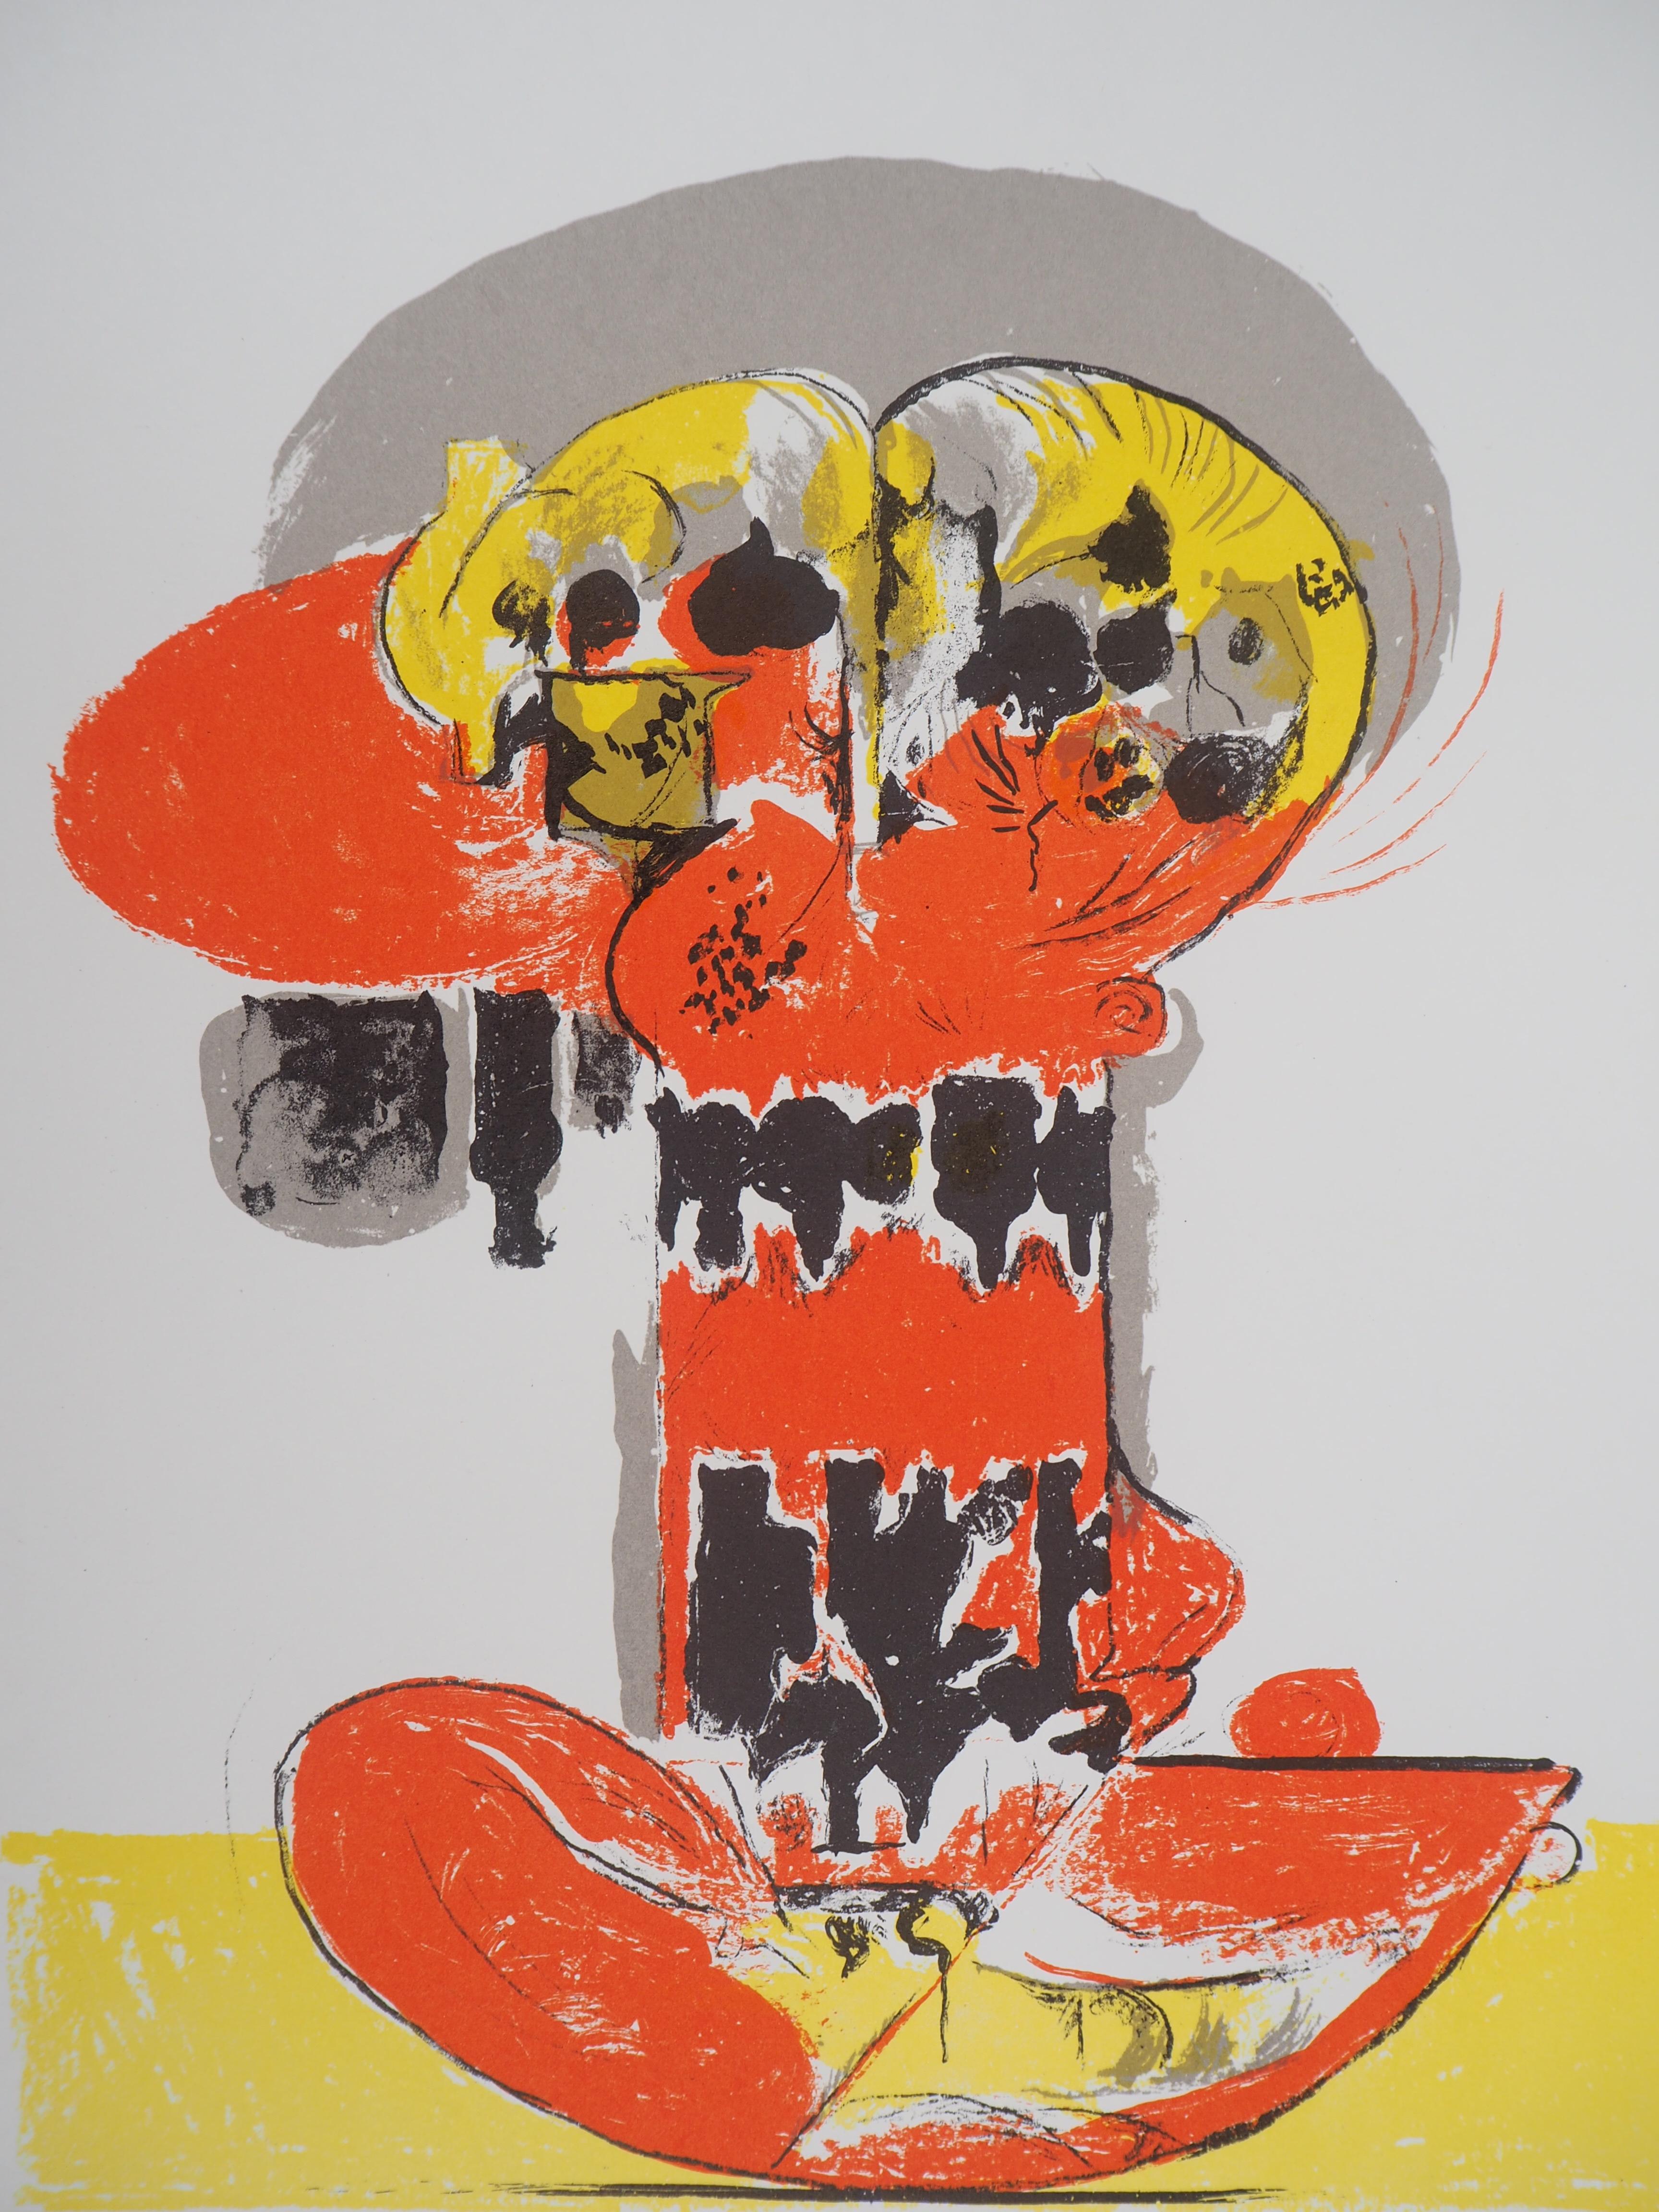 Composition with yellow and red - Original lithograph - Mourlot, 1972 - Print by Graham Sutherland